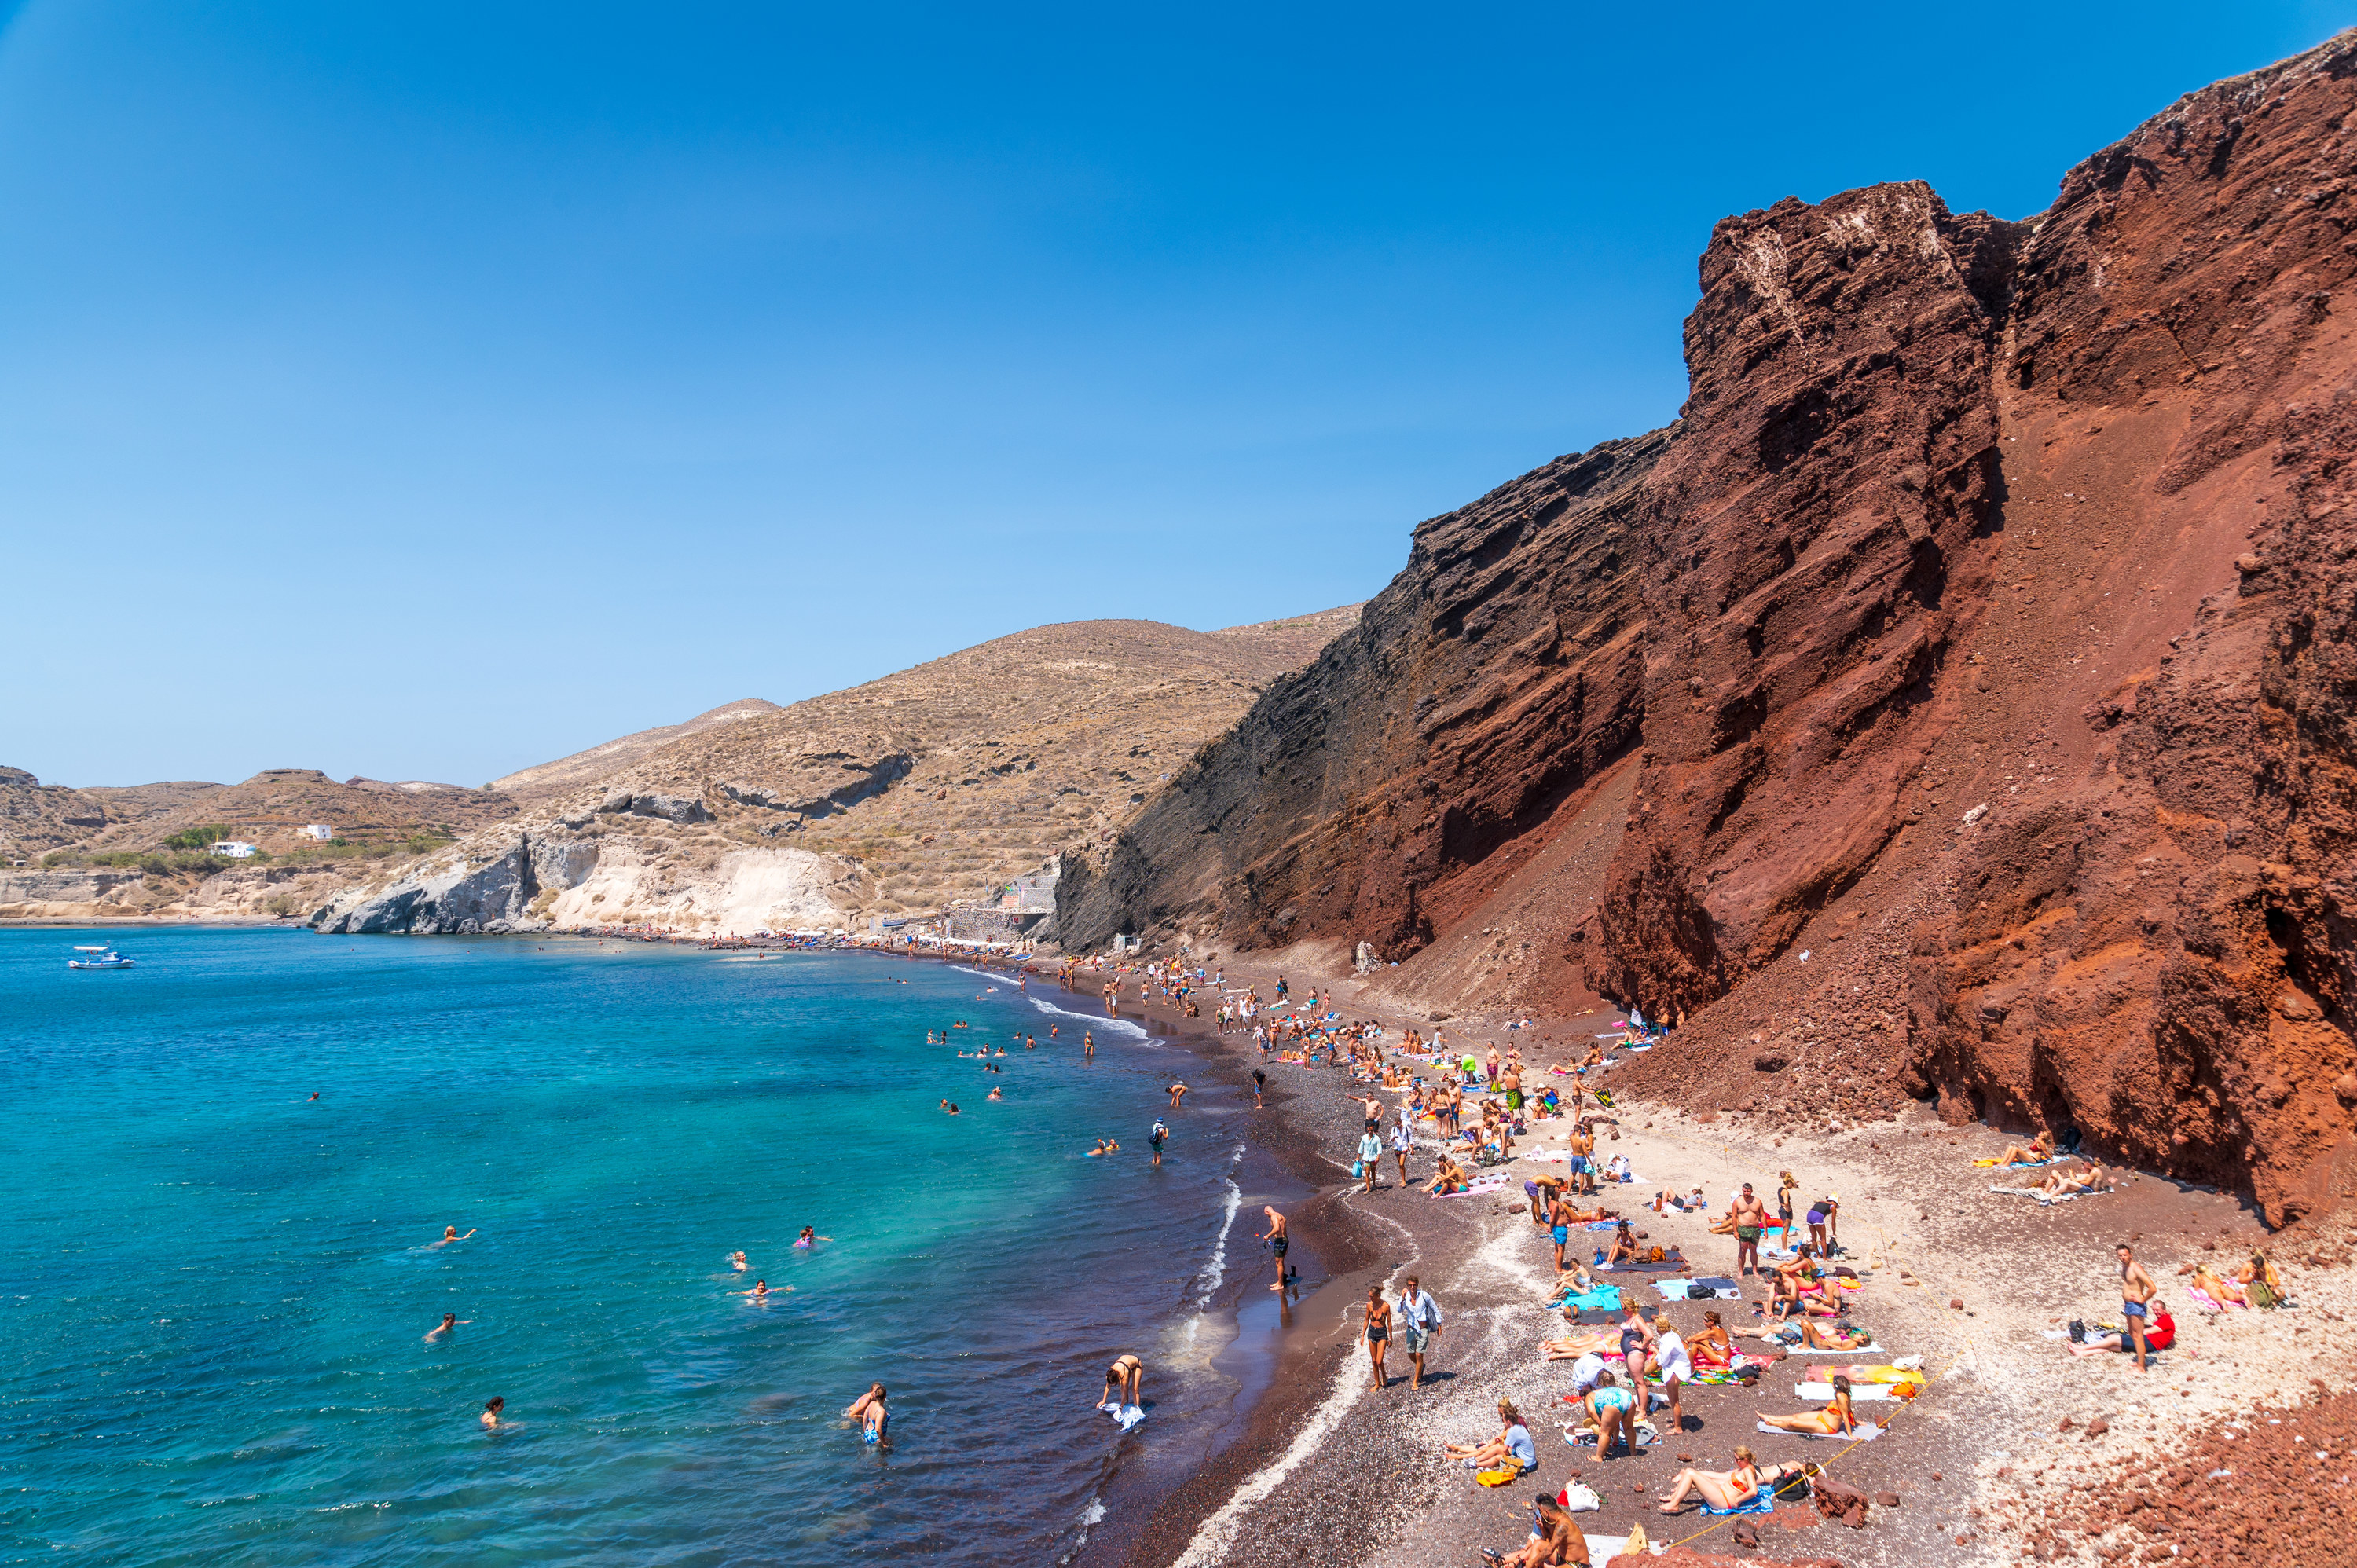 This is a photo of the famous Red Beach on the island of Santorini, Greece